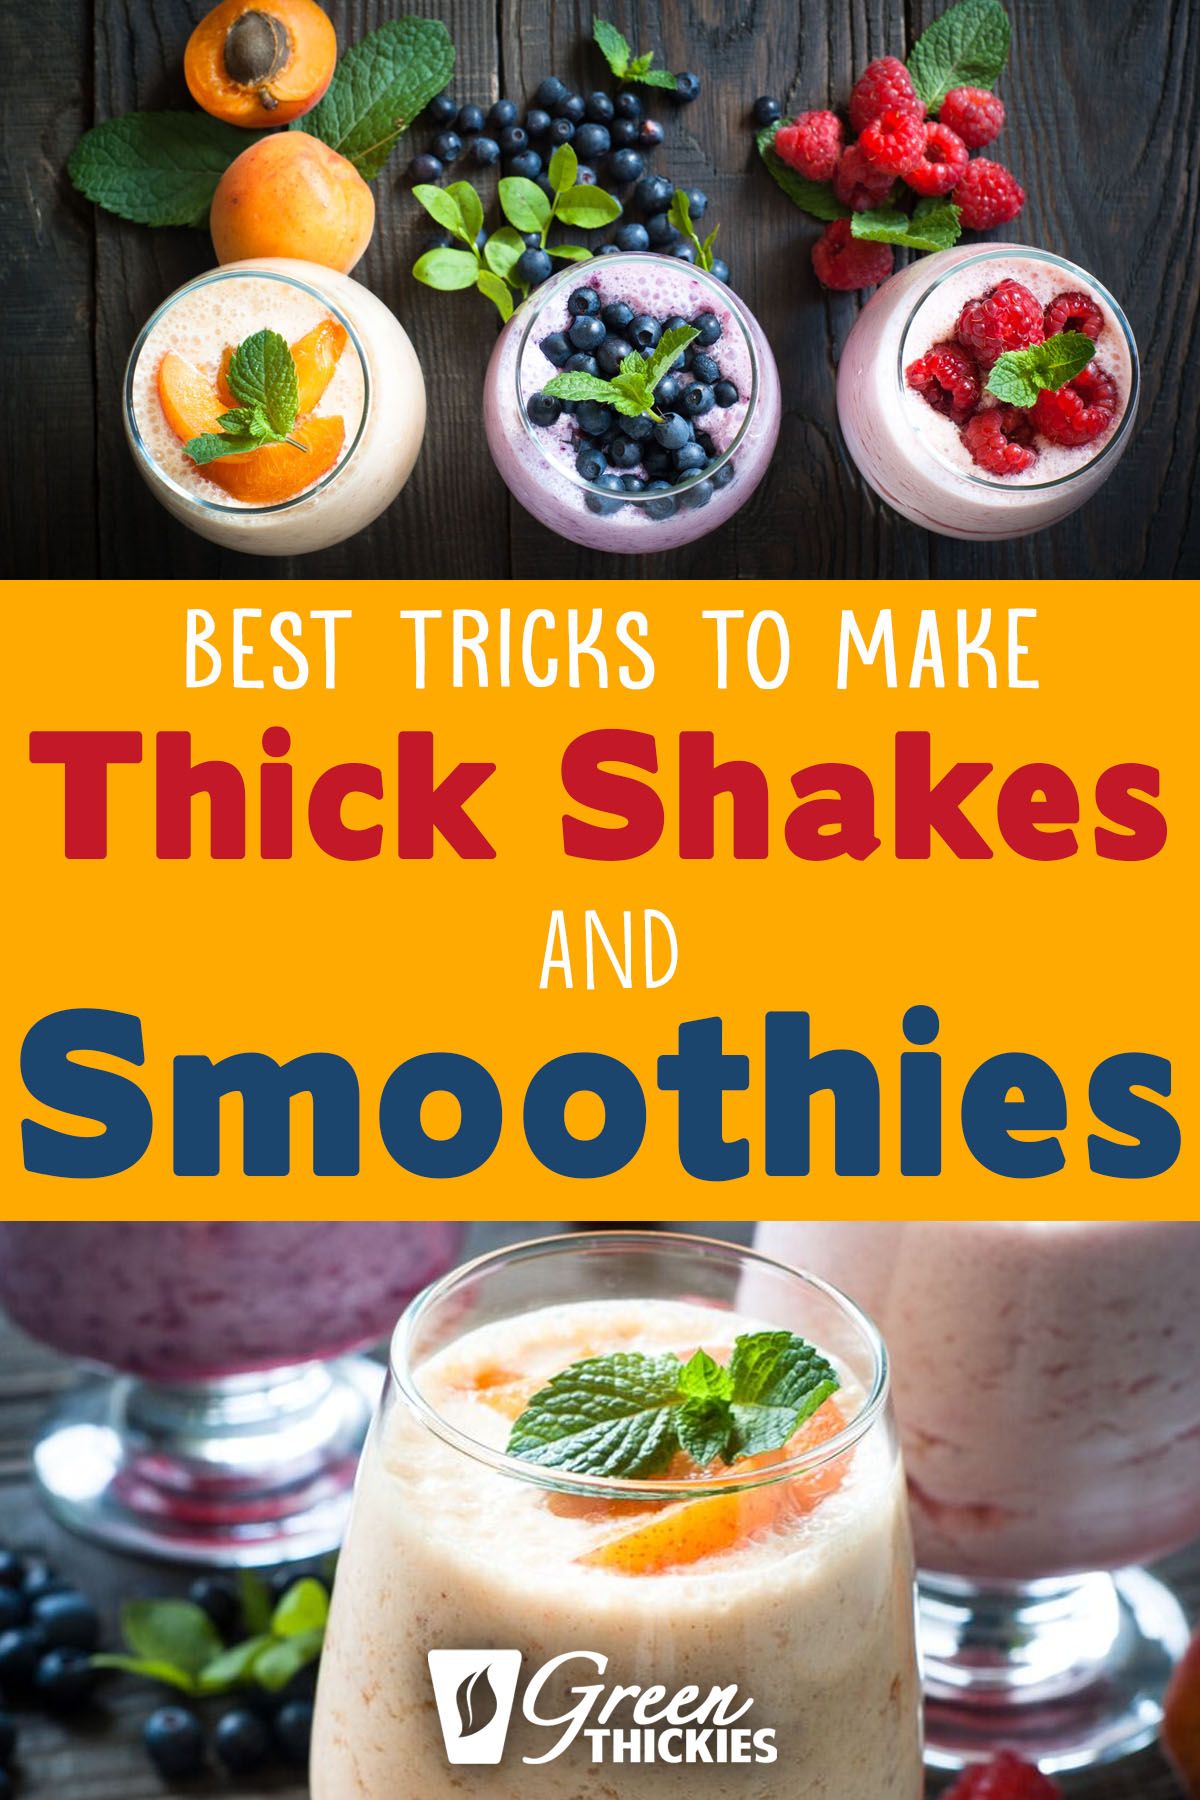 How To Make Thick Shakes And Smoothies: 56 Easy Ways ...